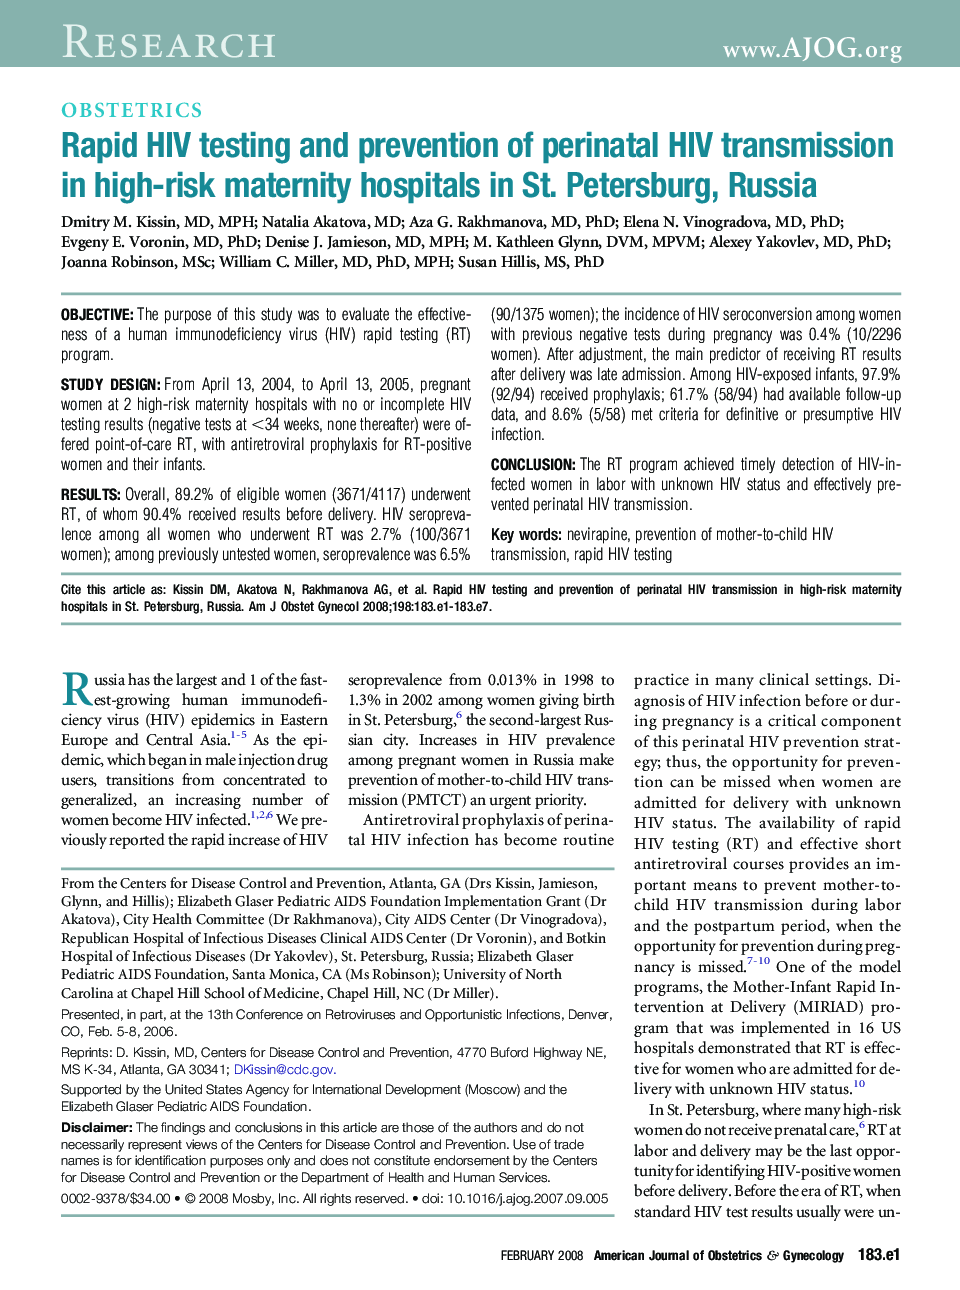 Rapid HIV testing and prevention of perinatal HIV transmission in high-risk maternity hospitals in St. Petersburg, Russia